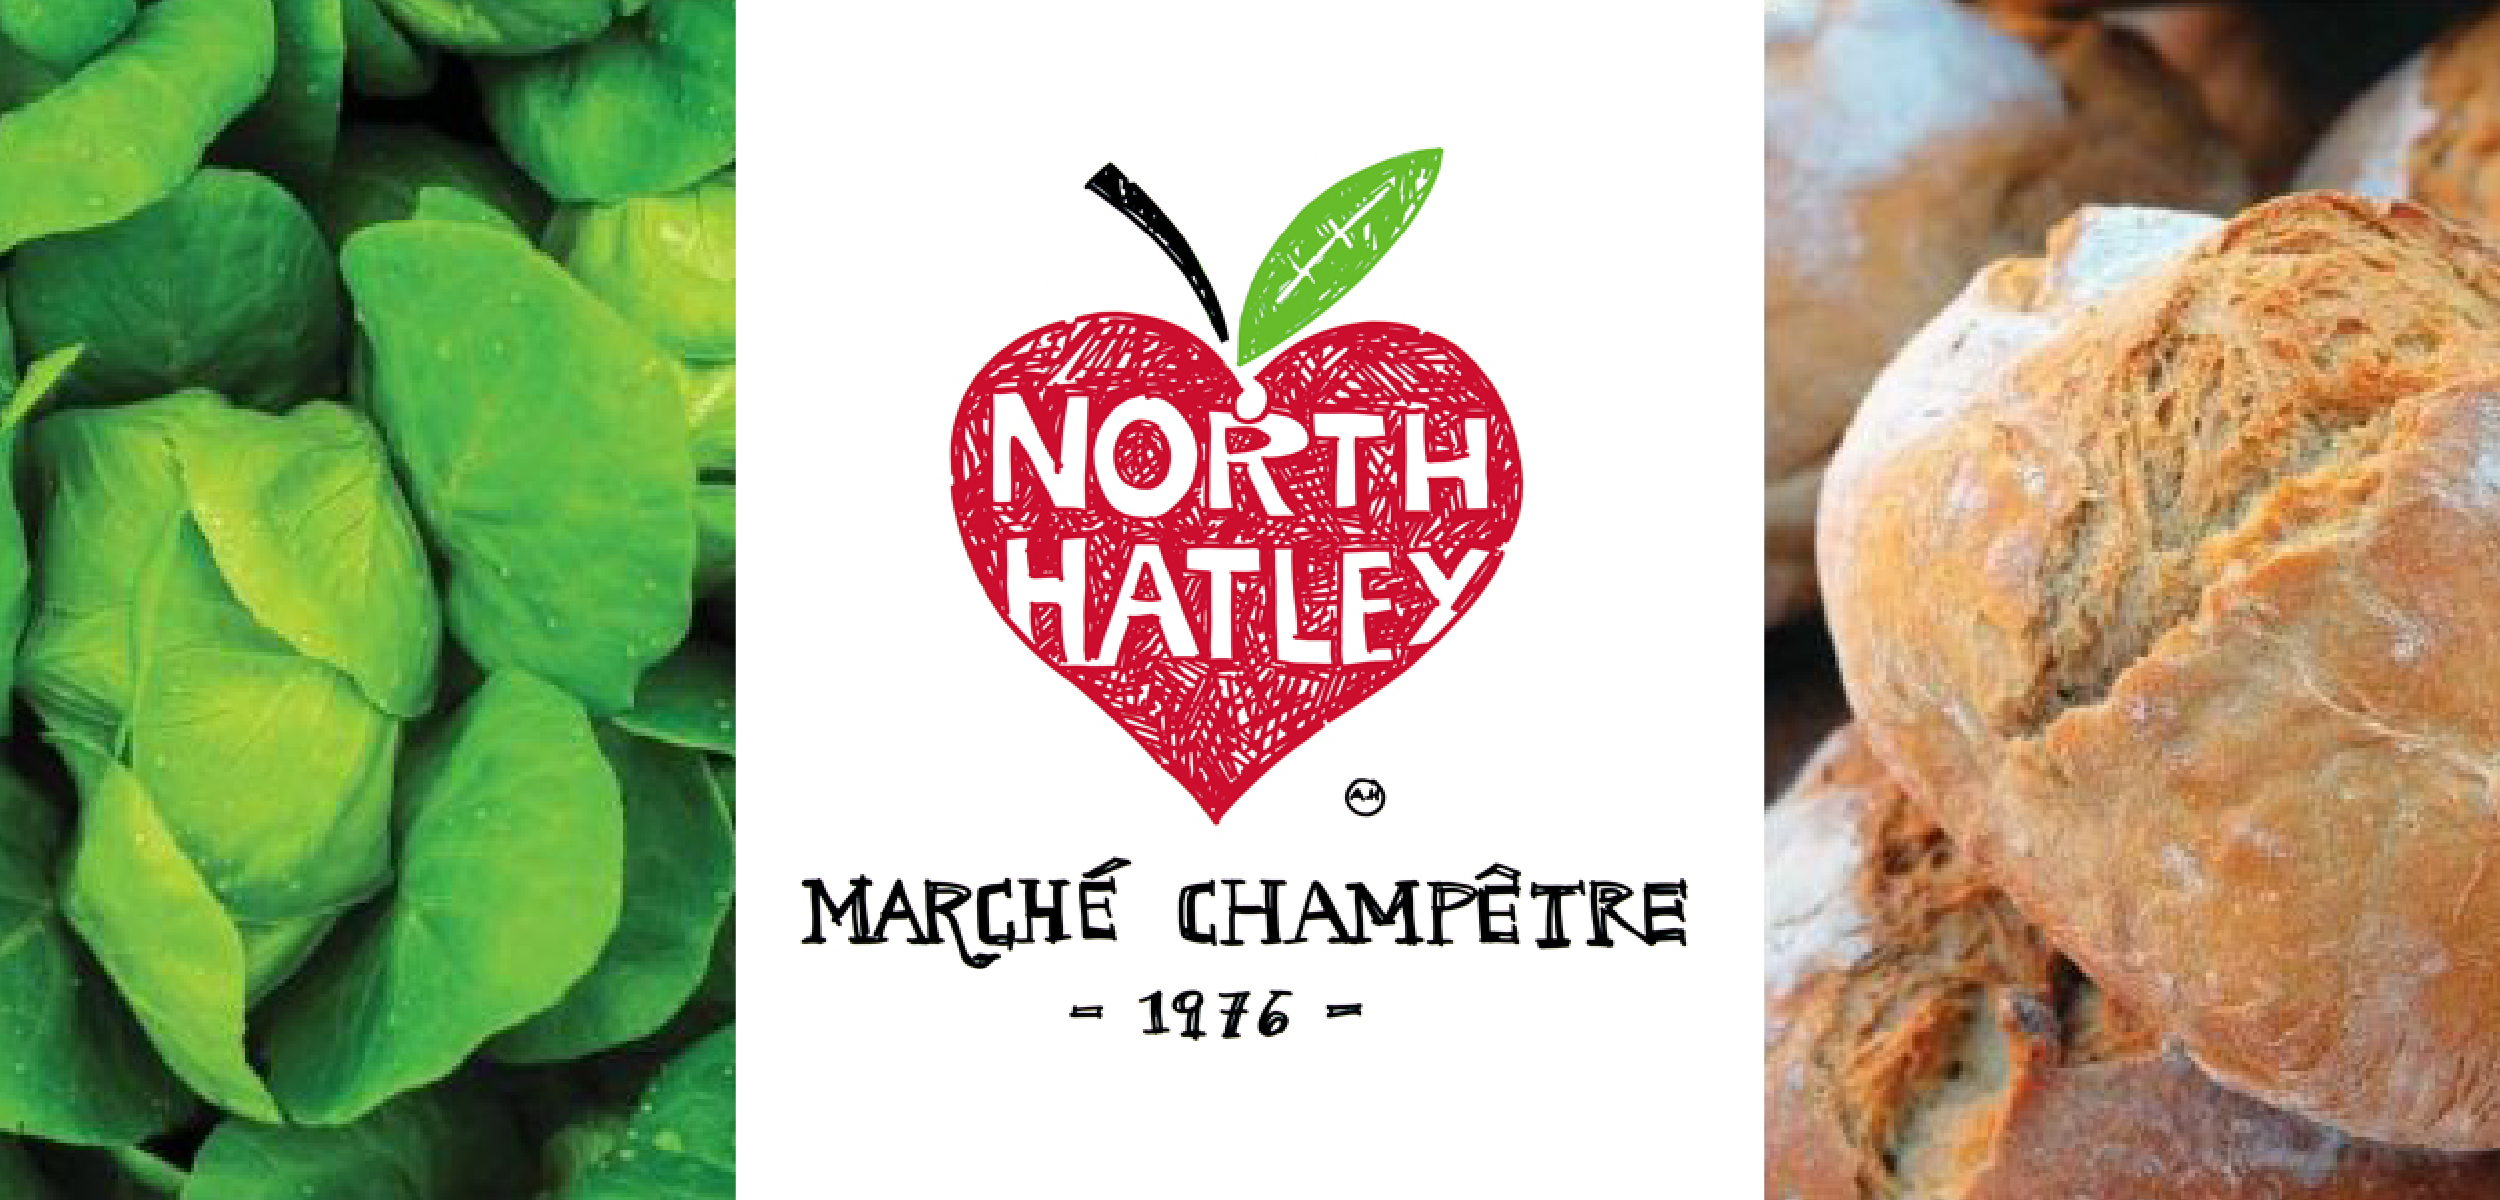 You are currently viewing Marché champêtre de North Hatley